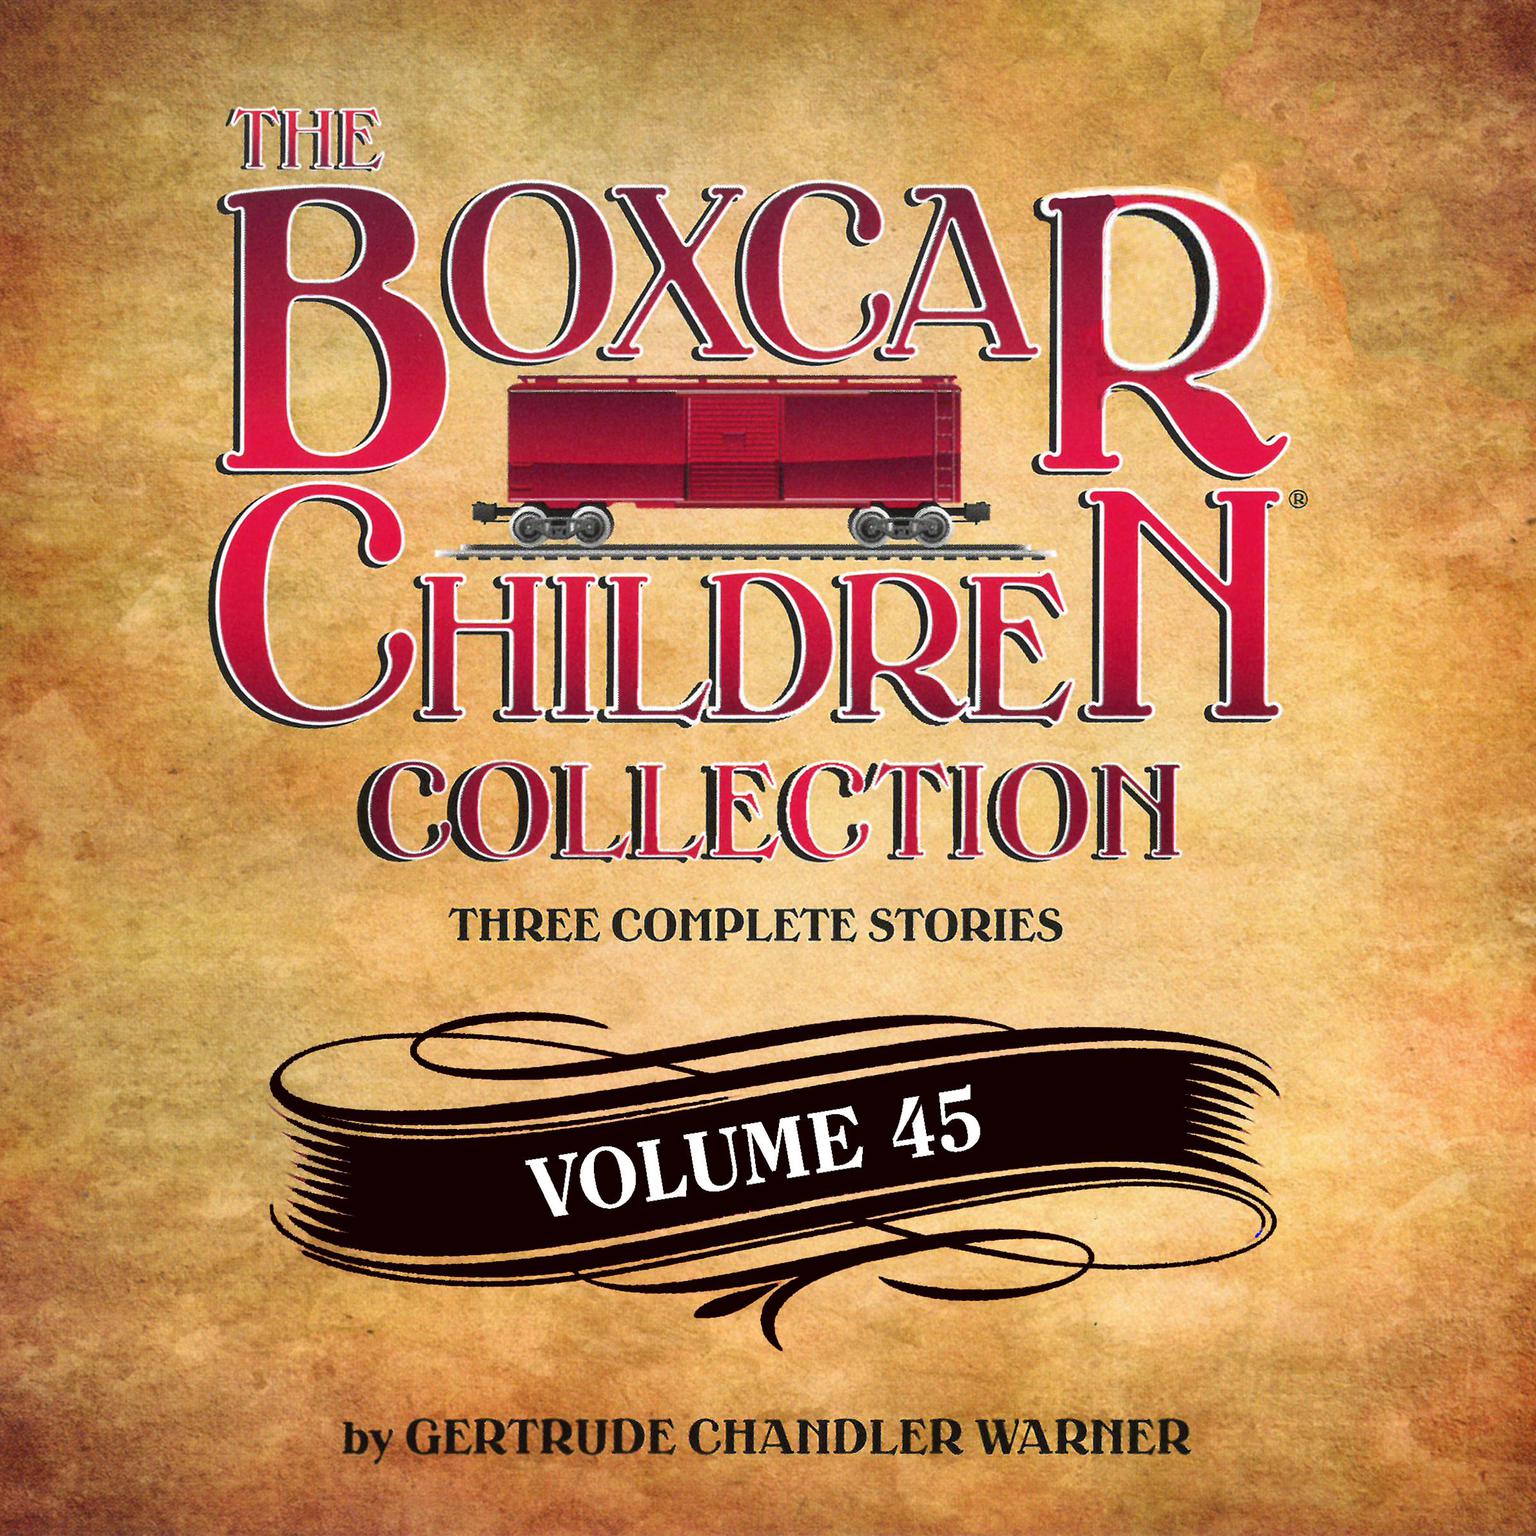 The Boxcar Children Collection Volume 45: The Mystery of the Stolen Snowboard, The Mystery of the Wild West Bandit, The Mystery of the Soccer Snitch Audiobook, by Gertrude Chandler Warner